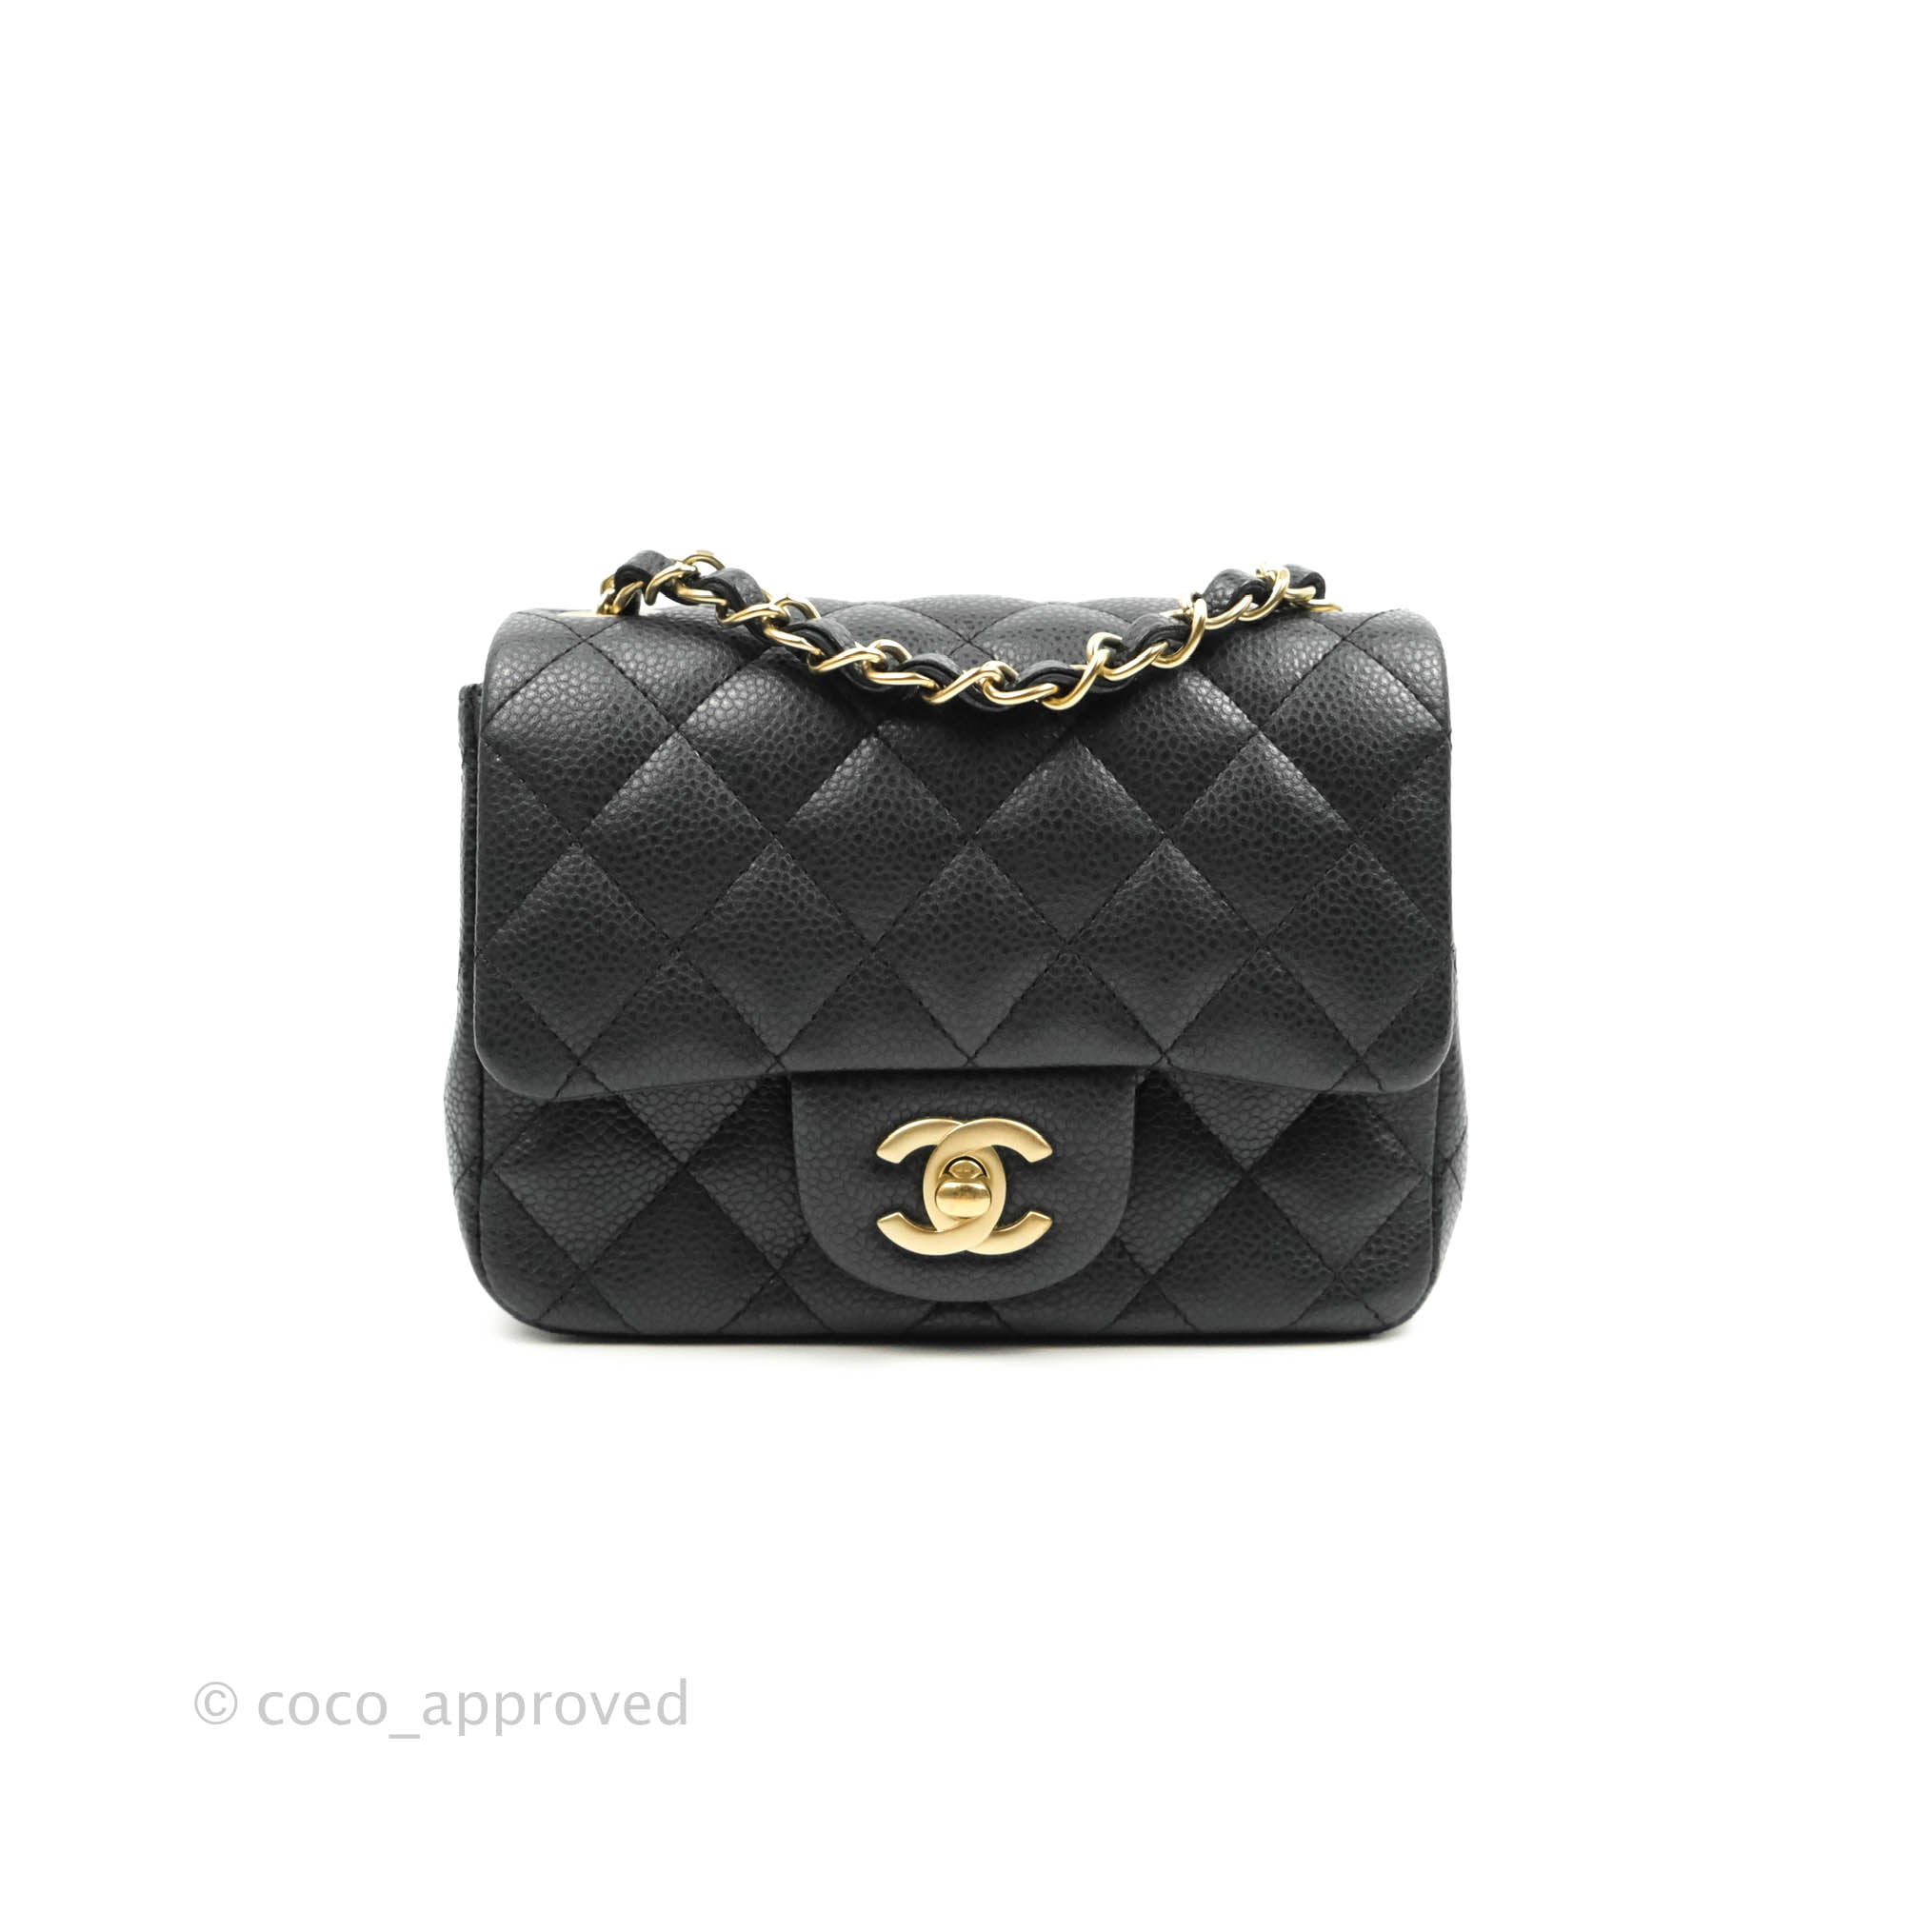 CHANEL VINTAGE MINI FLAP SQUARE BAG BABY PINK CAVIAR LEATHER